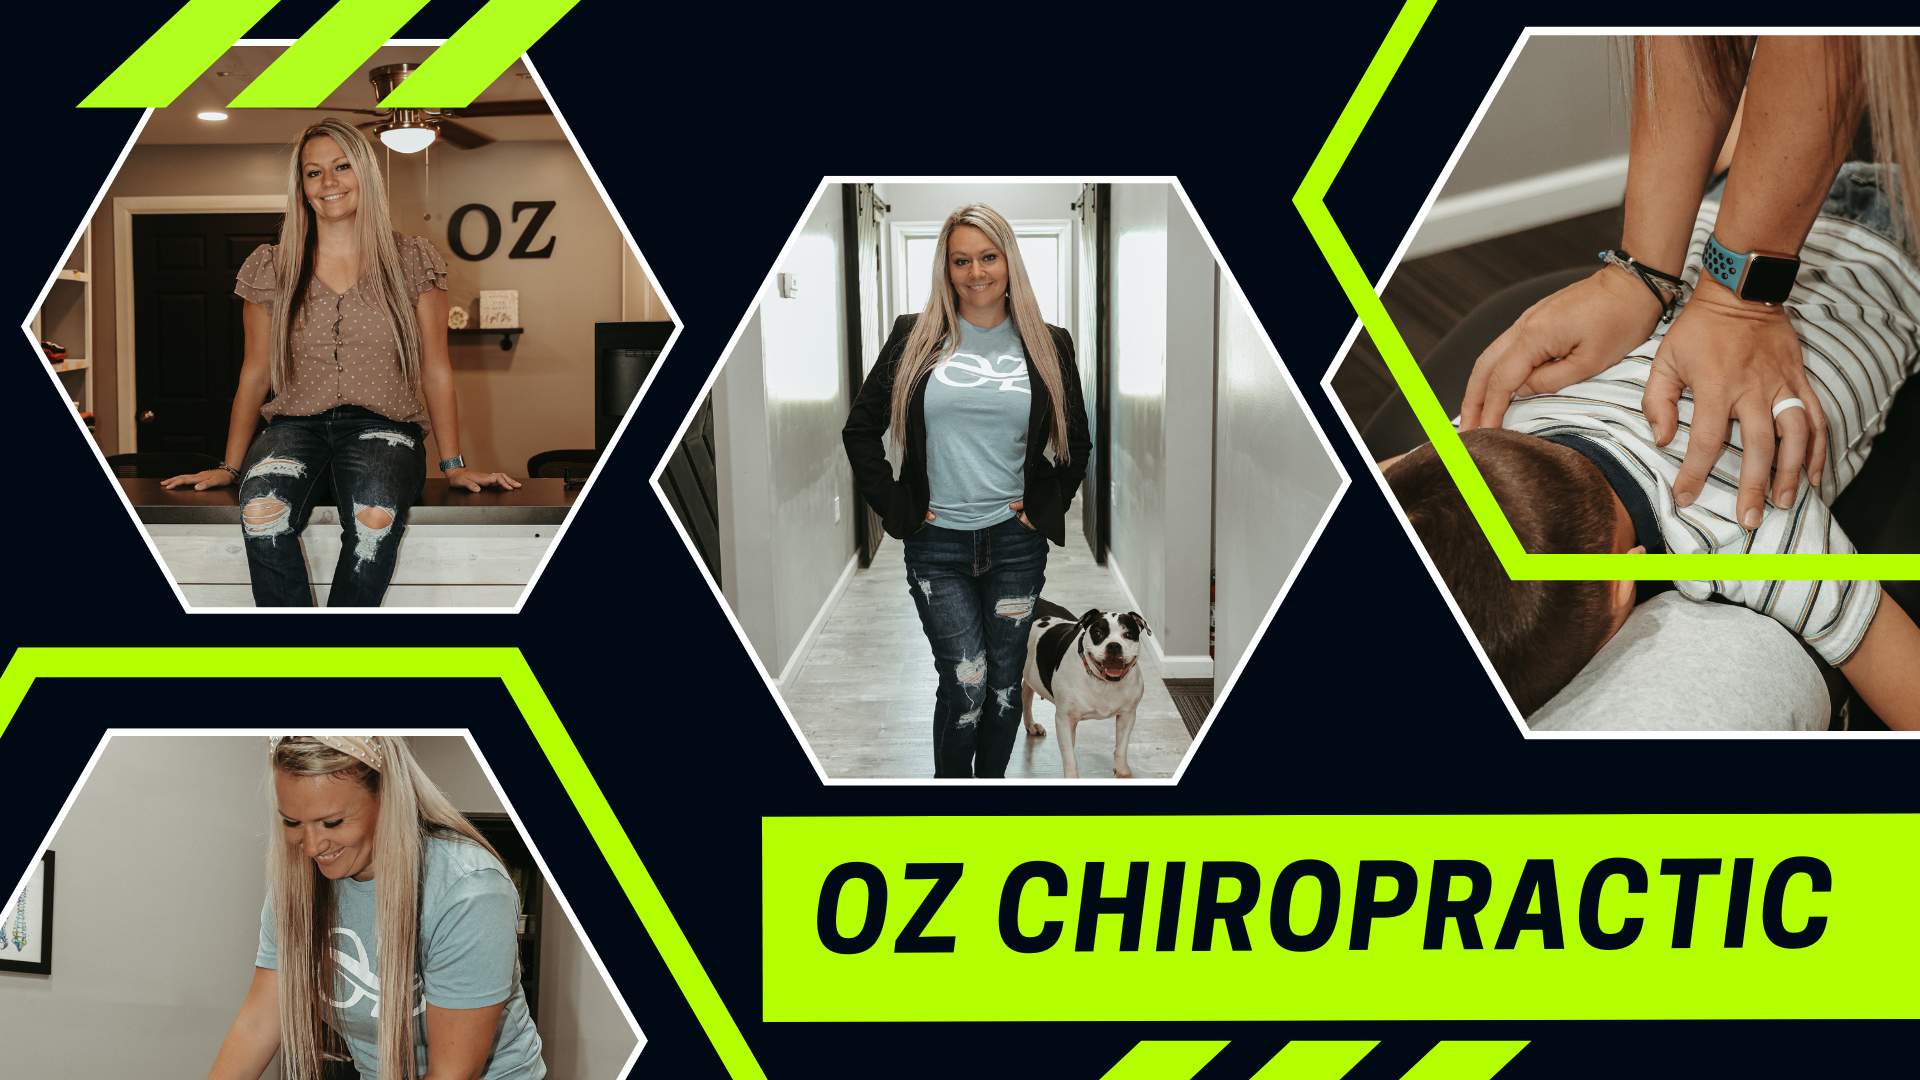 Dr. Oz of Oz Chiropractic with Office Pup Lulu